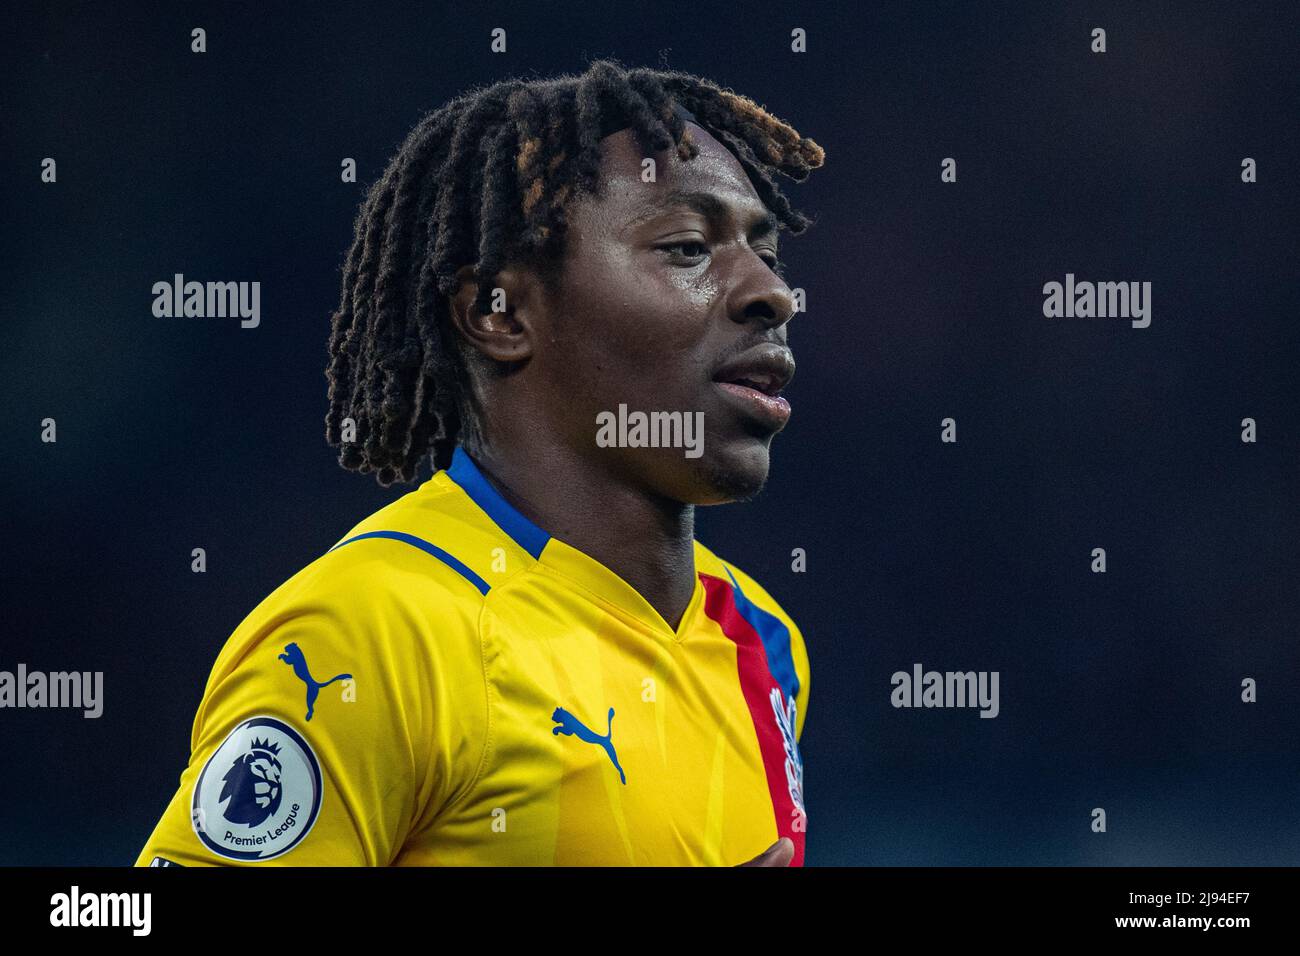 LIVERPOOL, ENGLAND - MAY 19: Eberechi Eze during the Premier League match between Everton and Crystal Palace at Goodison Park on May 19, 2022 in Liverpool, United Kingdom. (Photo by Sebastian Frej) Stock Photo